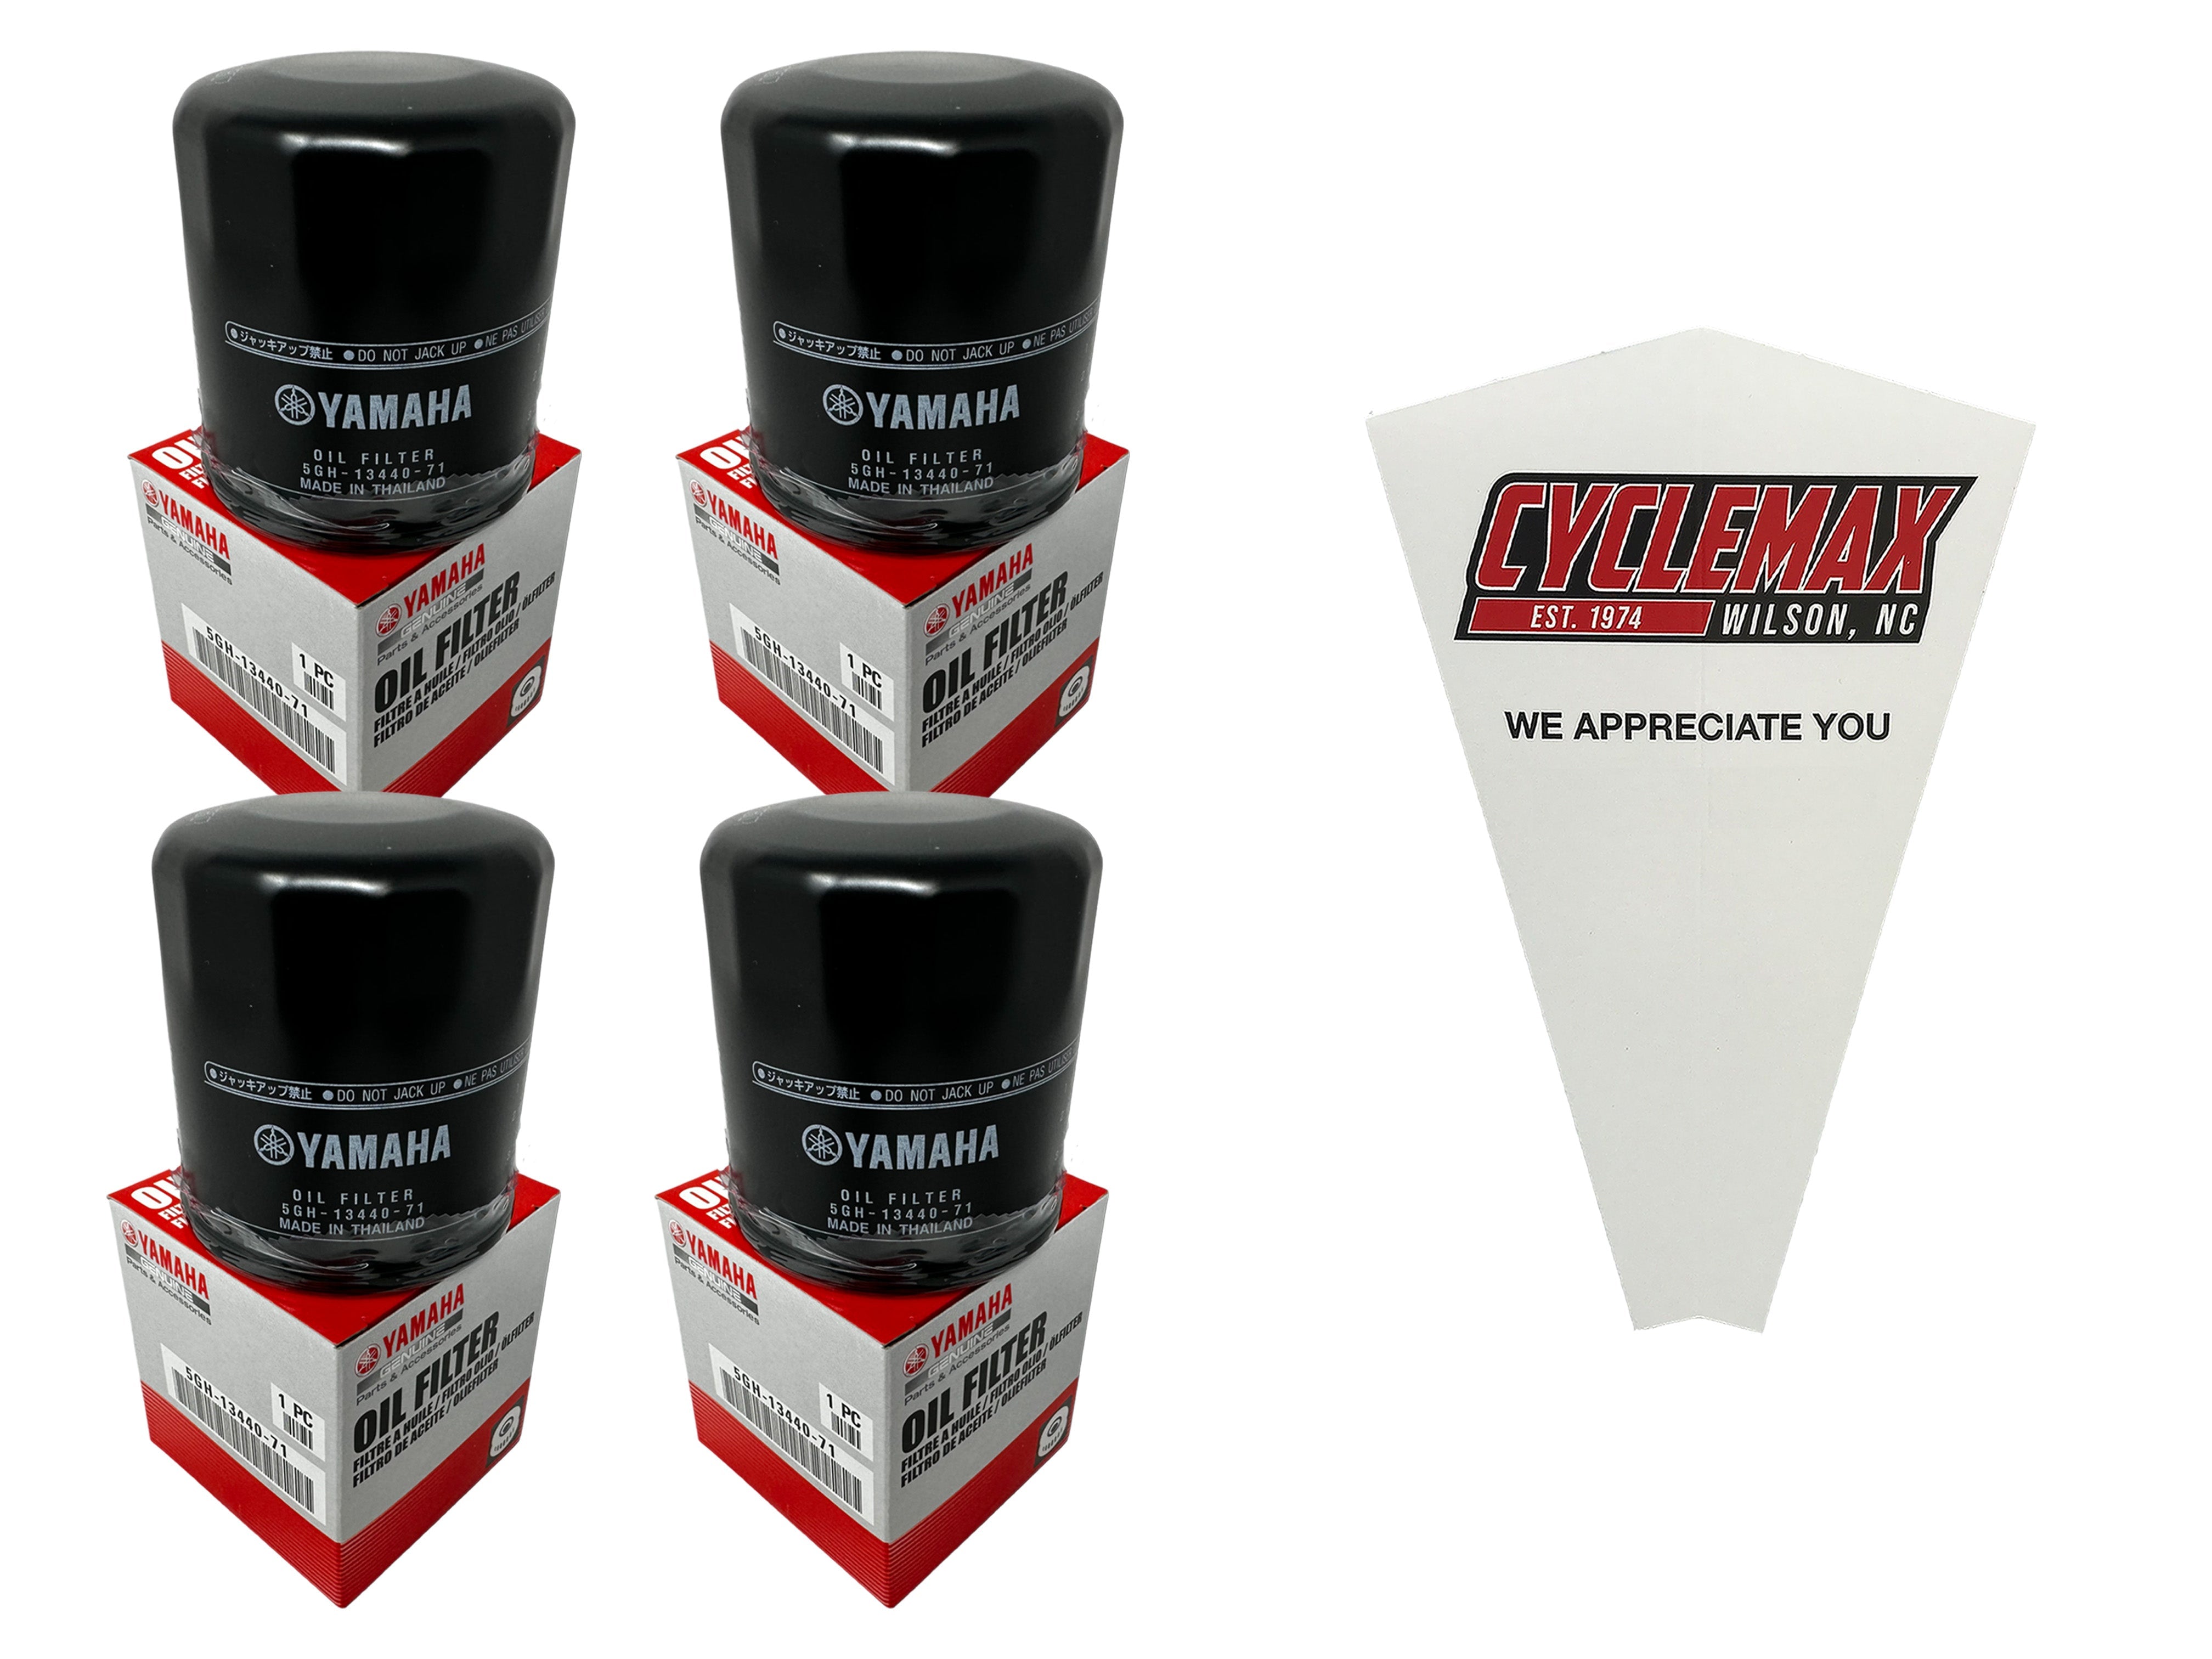 Cyclemax Four Pack for Yamaha Oil Filter 5GH-13440-71 Contains Four Filters and a Funnel